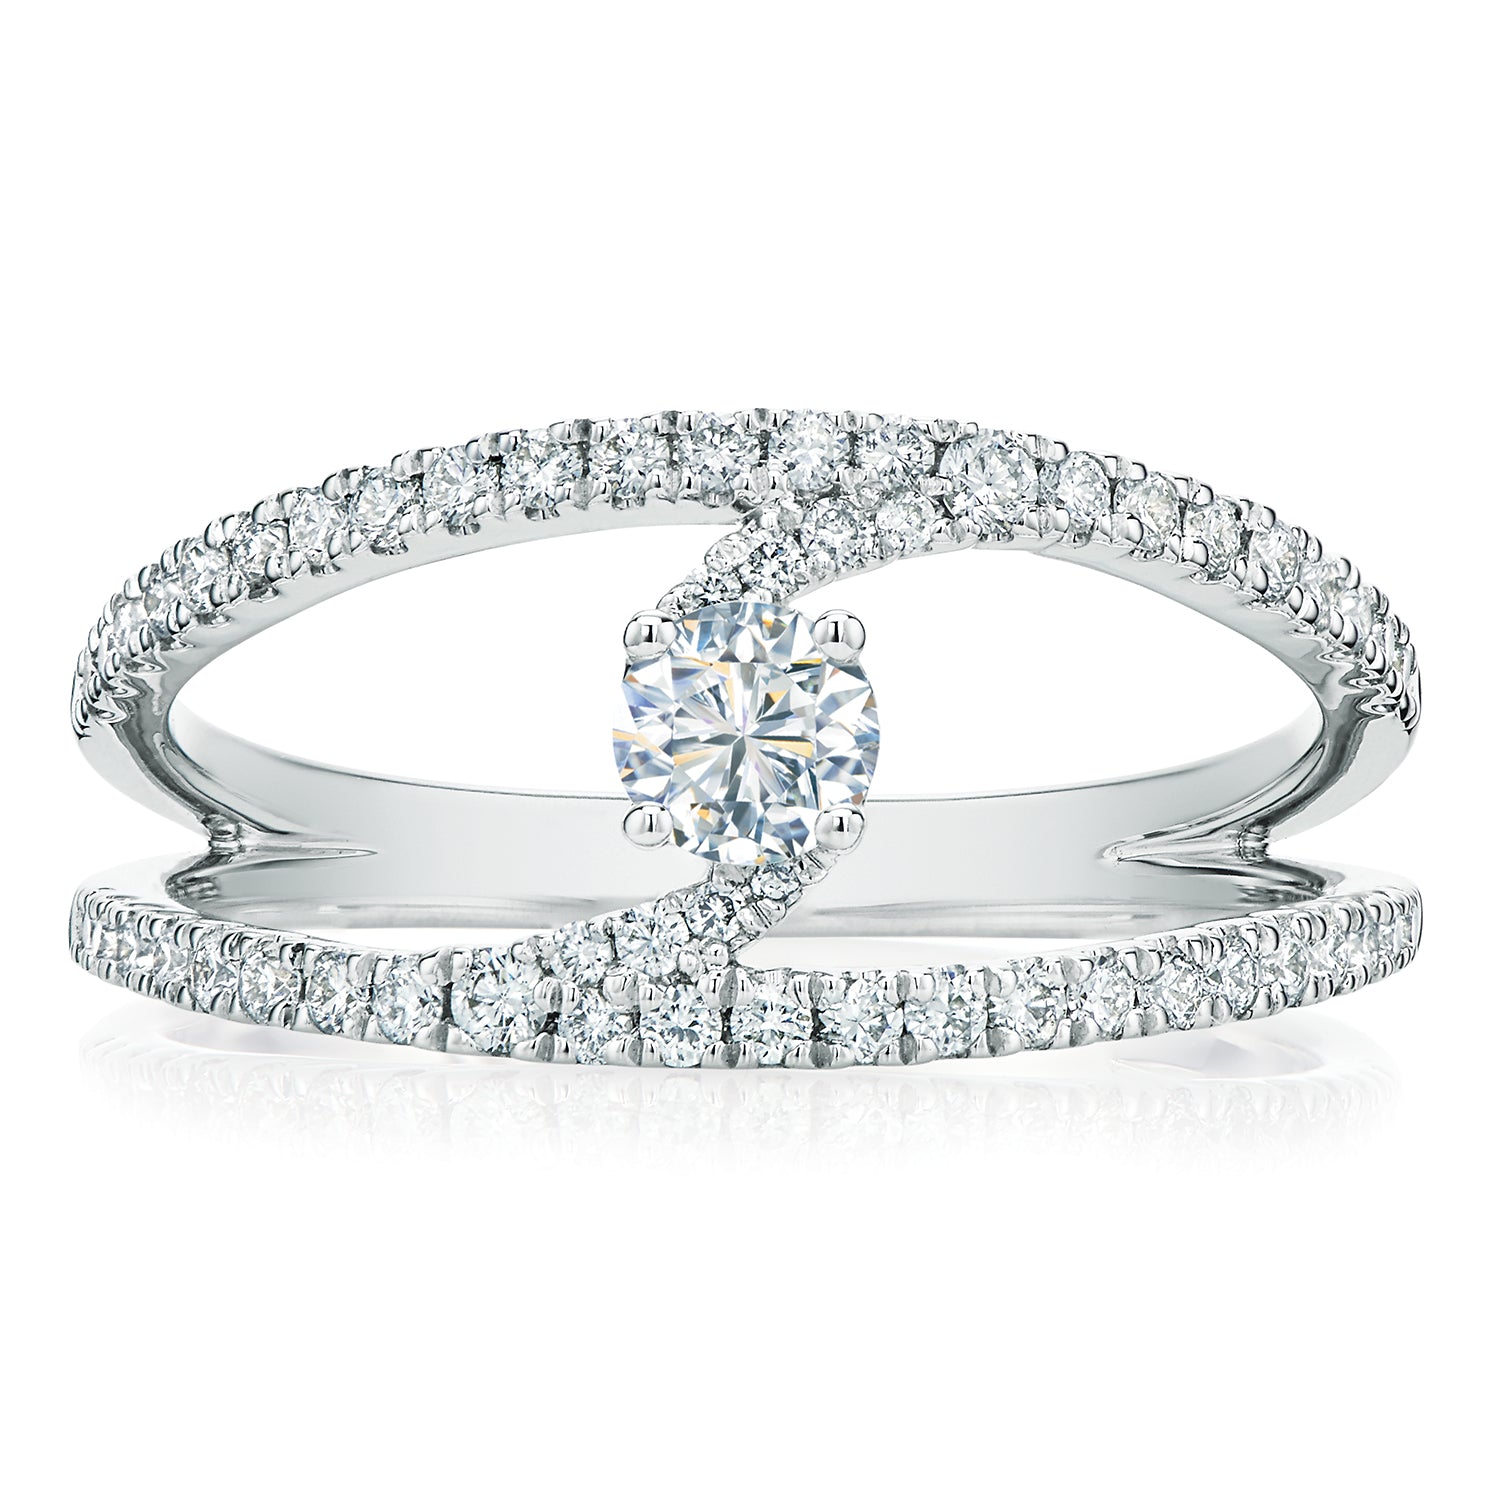 18ct White Gold Oval Diamond Ring 0.82ct at Segal's Jewellers